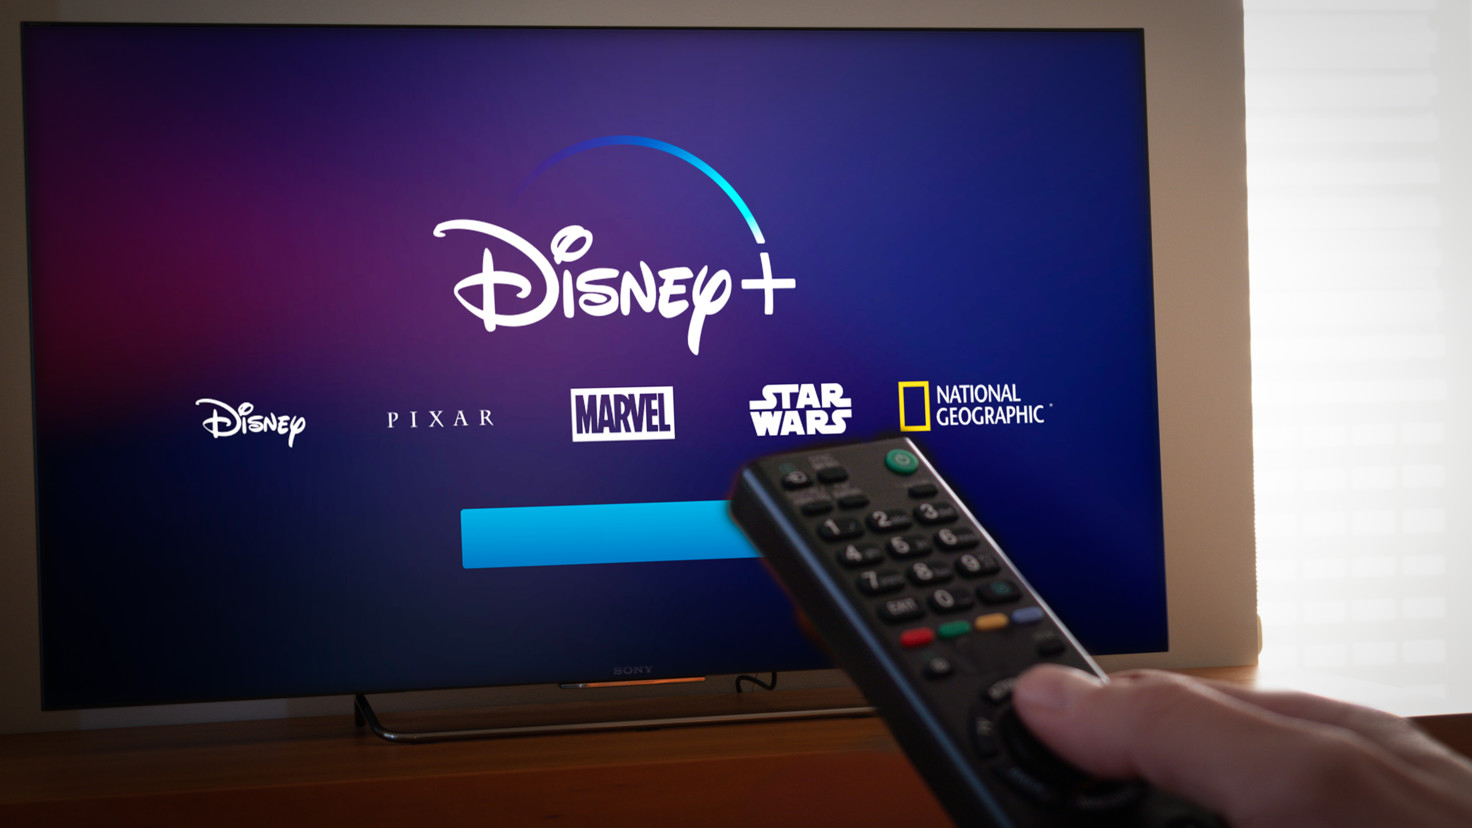 Disneys streaming service Disney plus launches in the Netherlands US and Canada